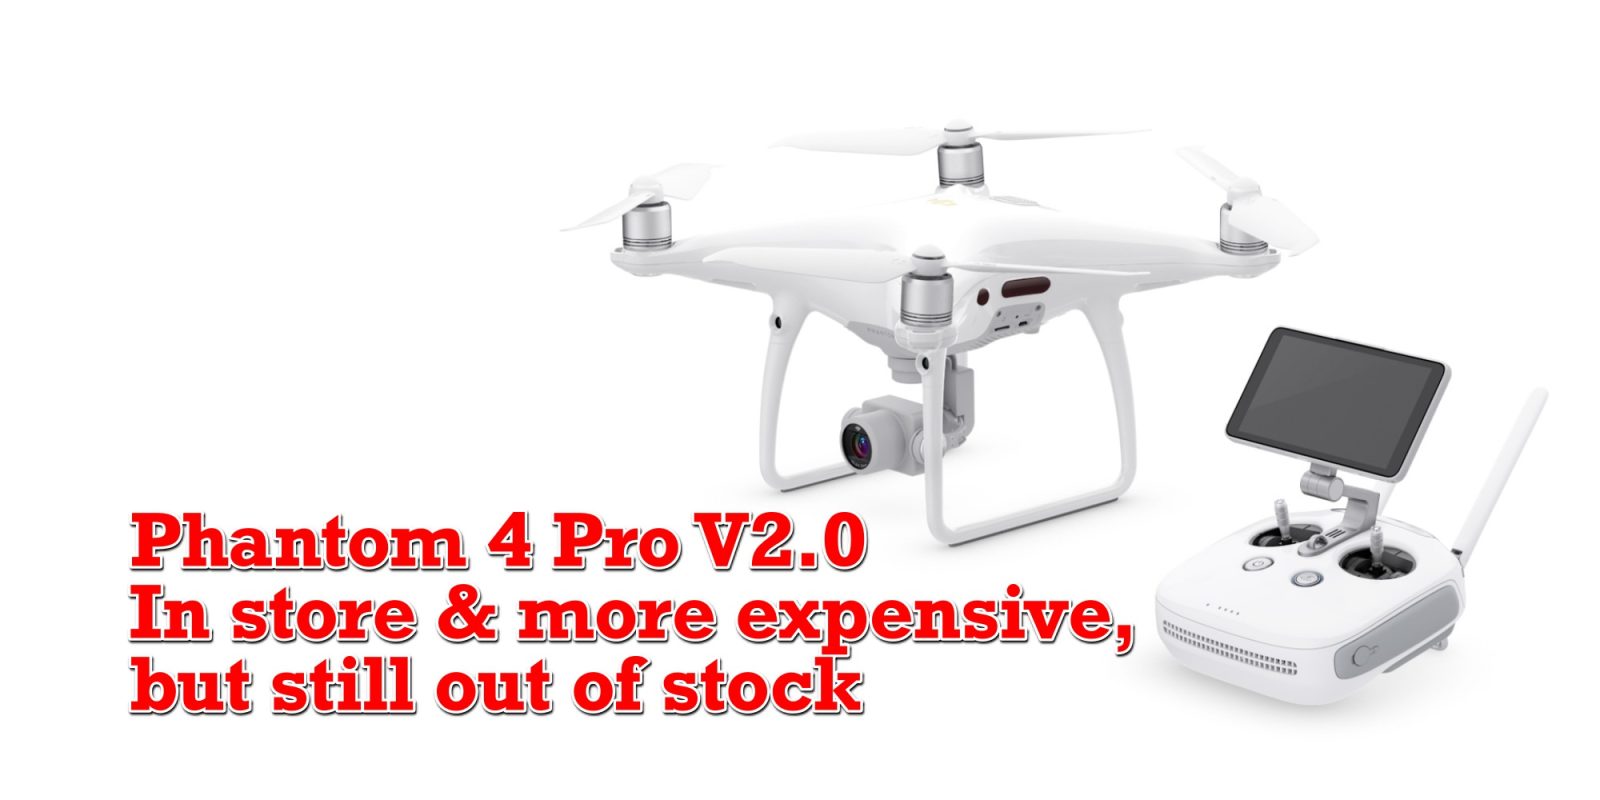 Phantom 4 Pro V2.0 back in DJI online store - higher price and out of stock